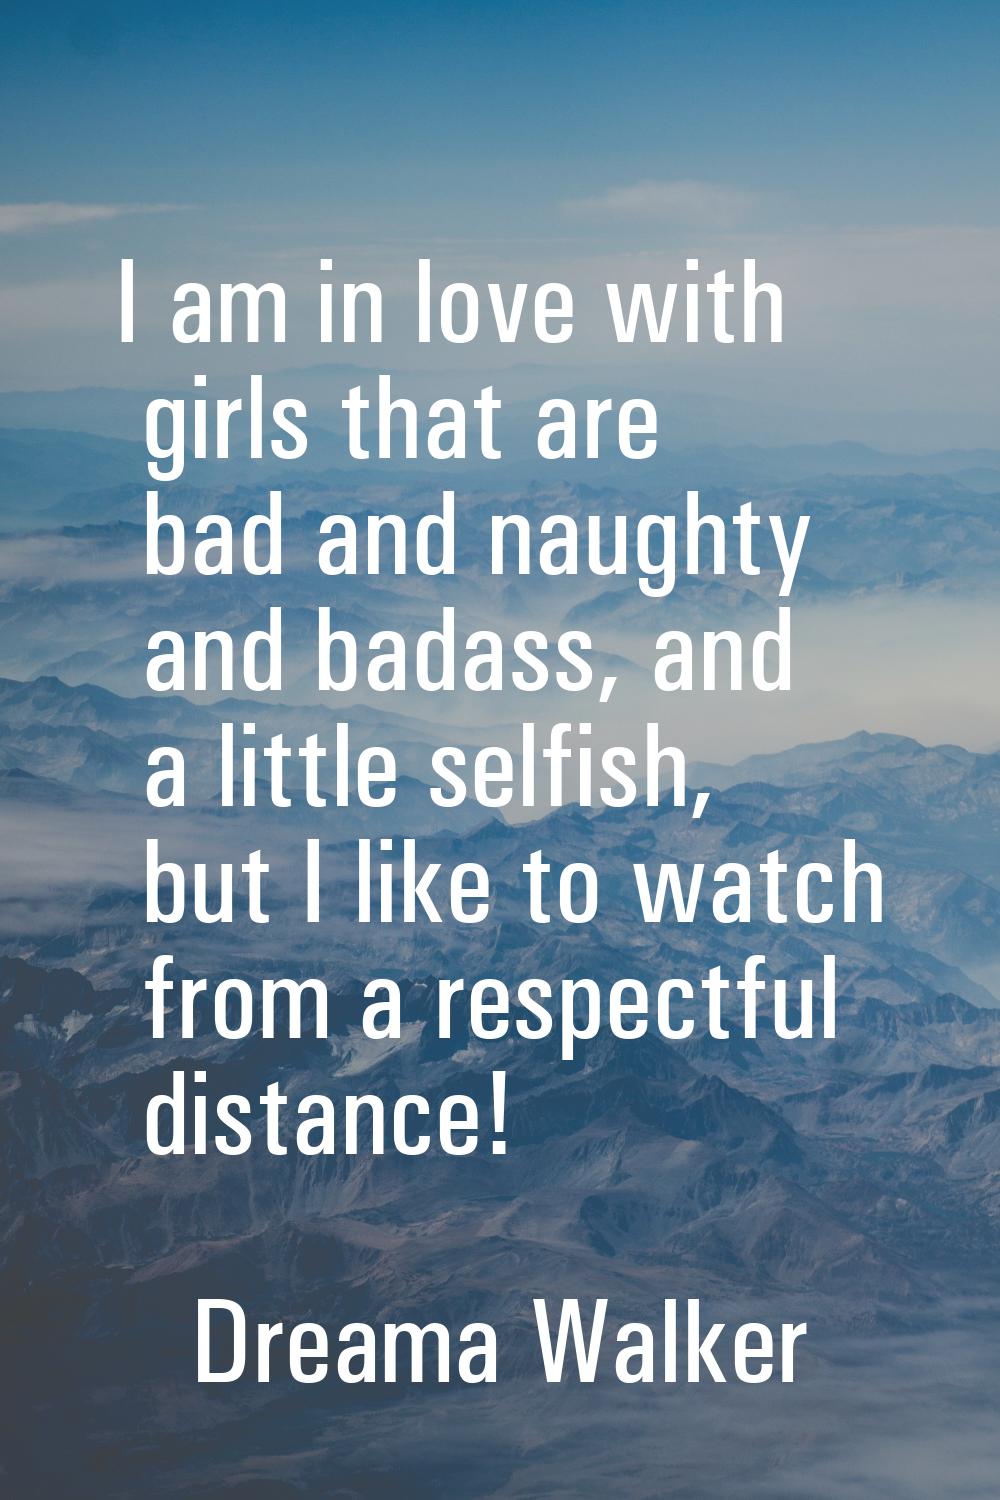 I am in love with girls that are bad and naughty and badass, and a little selfish, but I like to wa